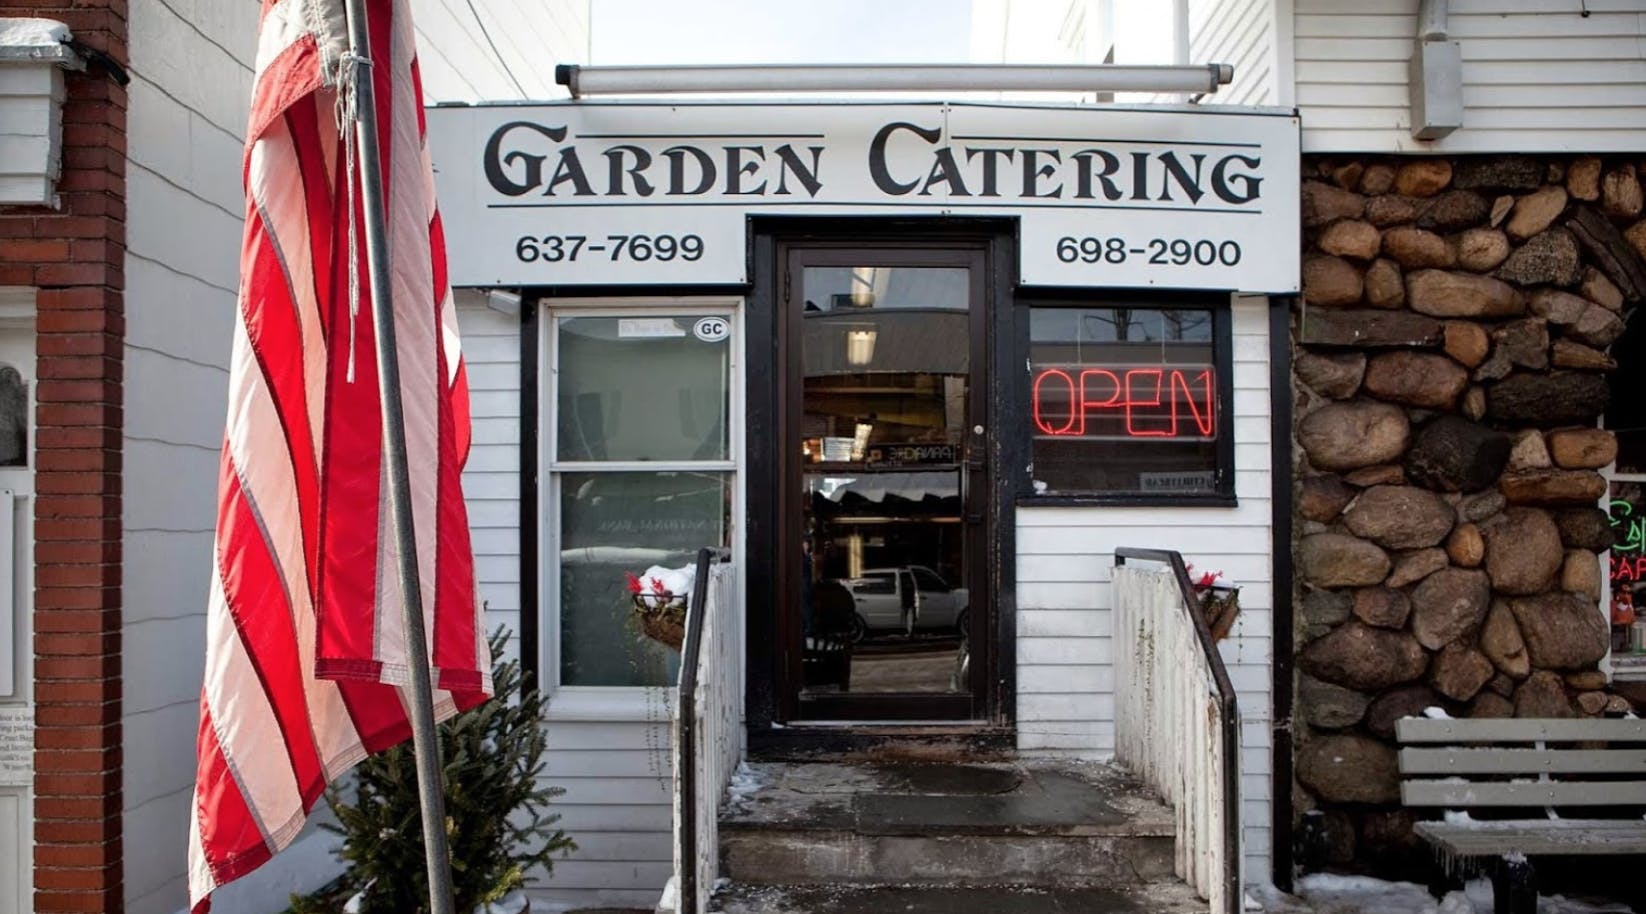 Port Chester Hours Location Garden Catering The Best Nuggets Youll Ever Have - Locations In Ct Ny